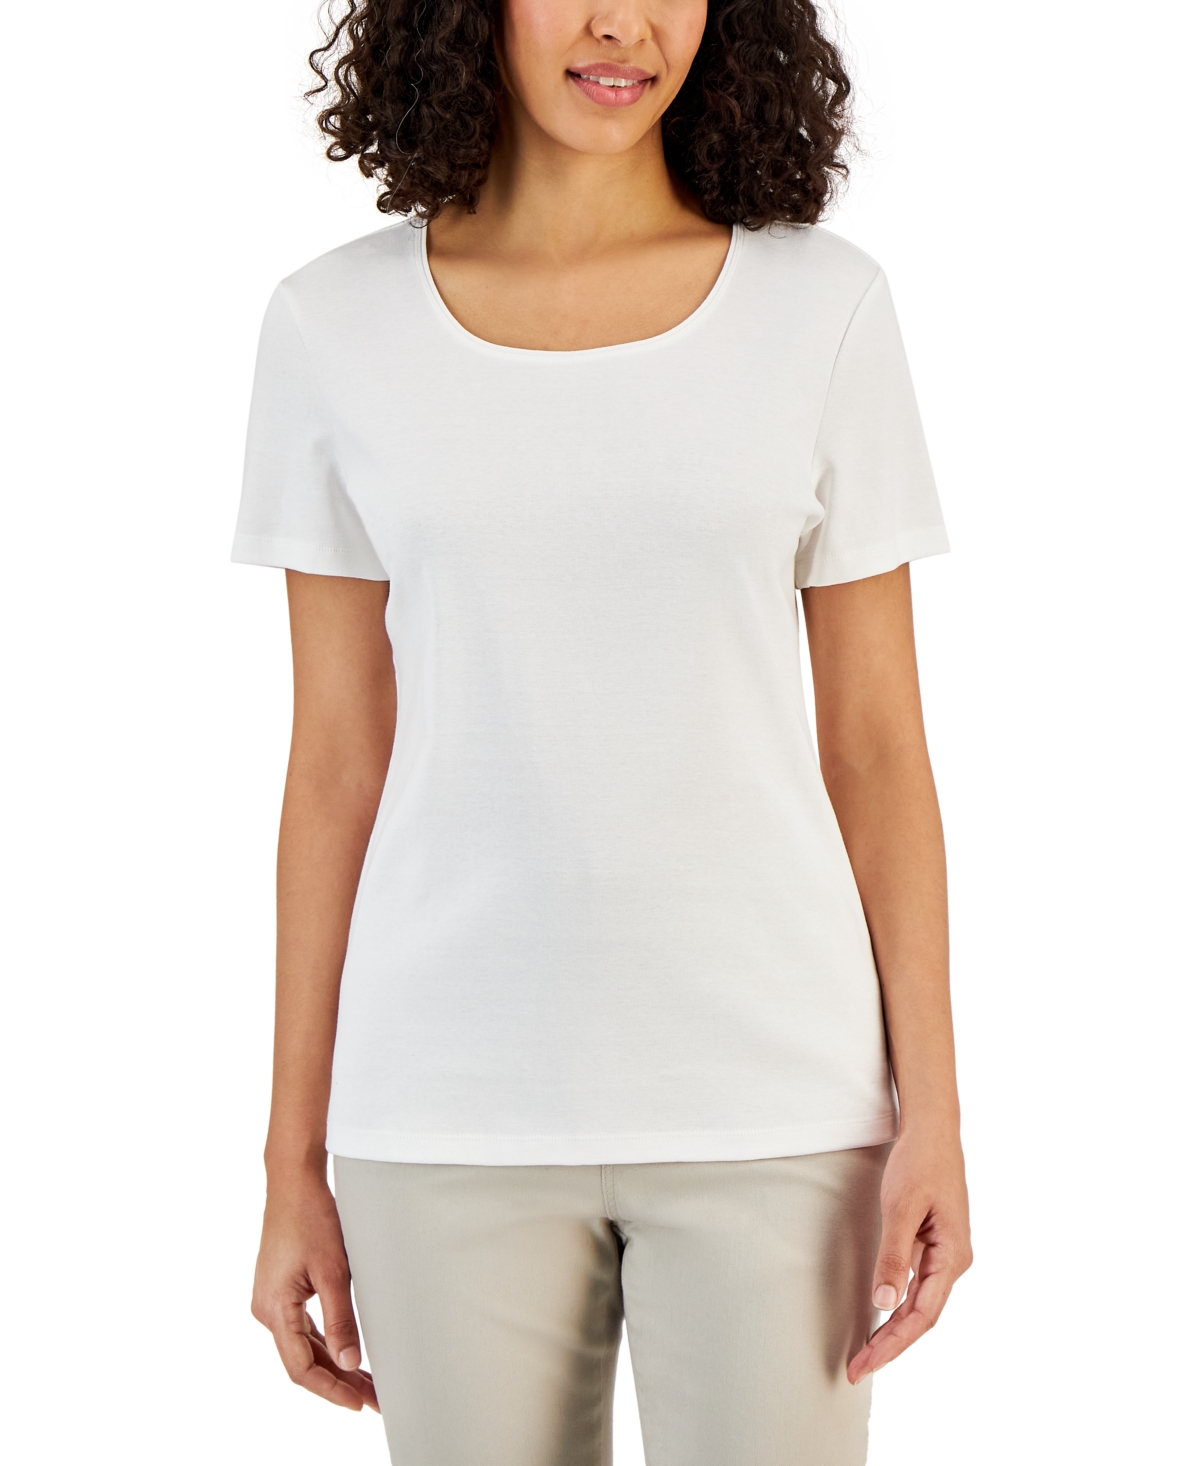 Petite Cotton Scoop-Neck Top, Created for Macy's - Bright White